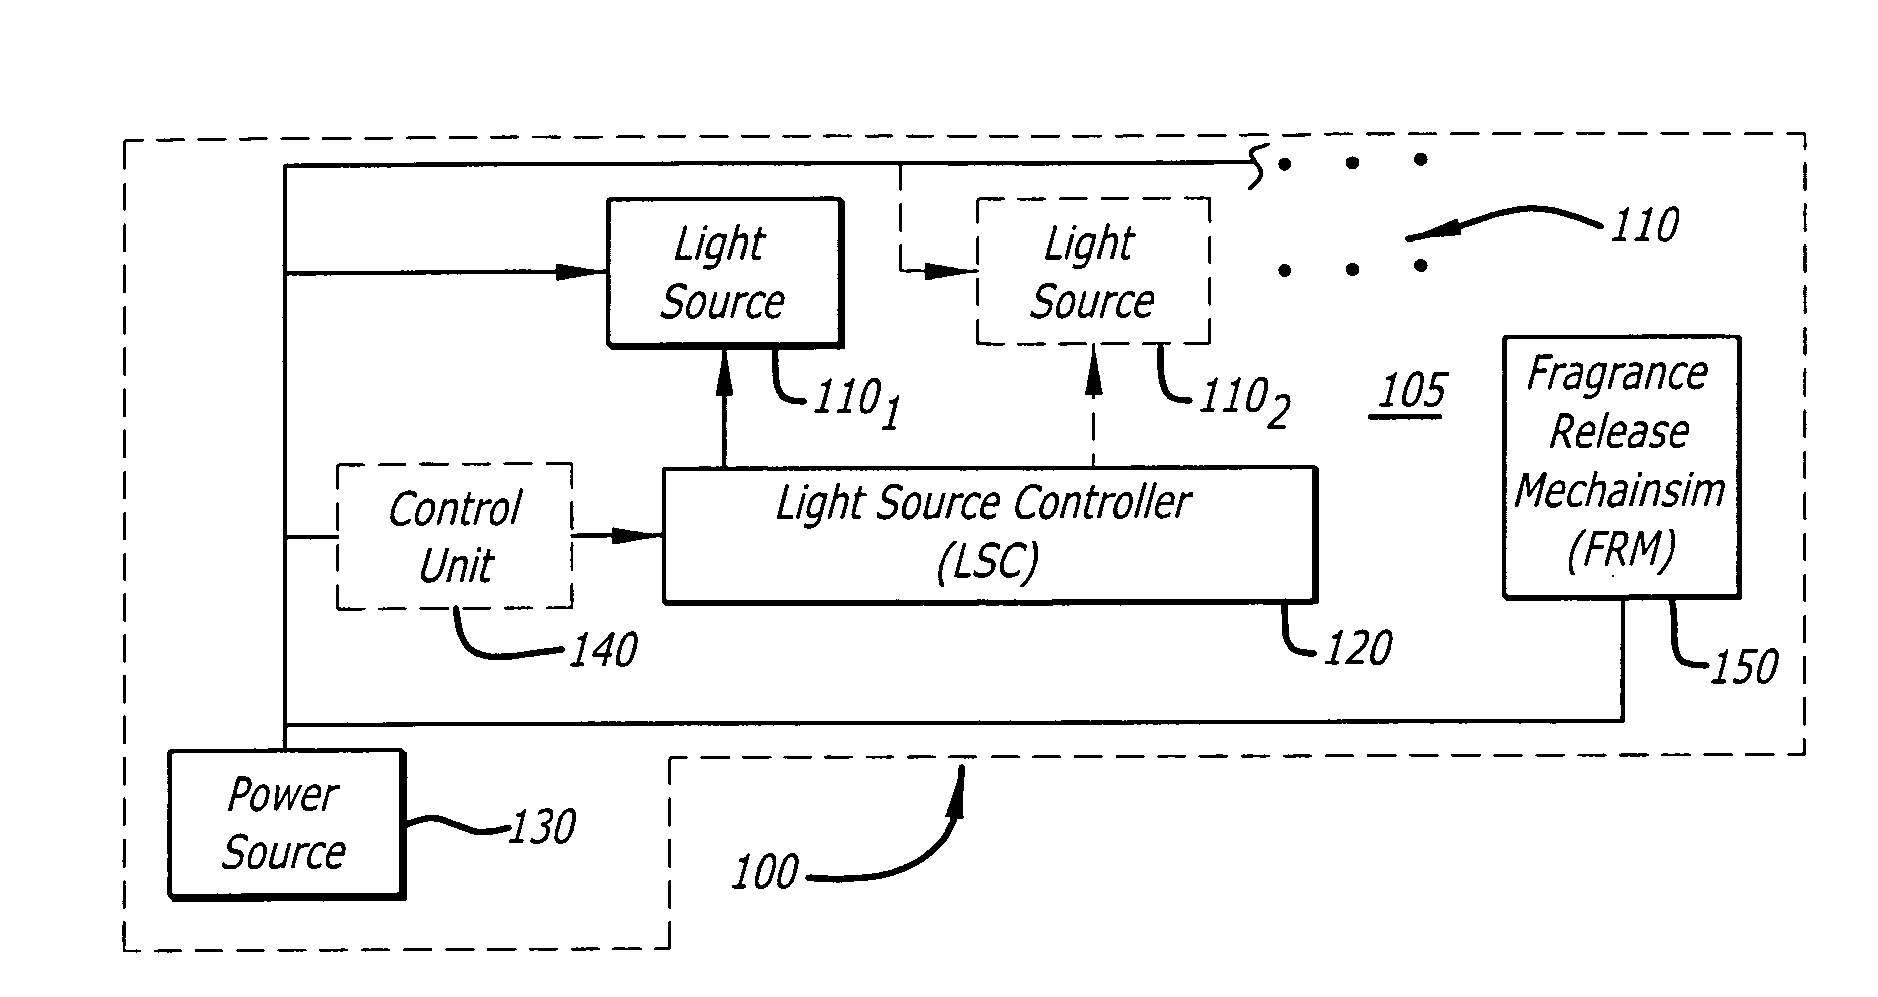 Candle emulation device with fragrance release mechanism